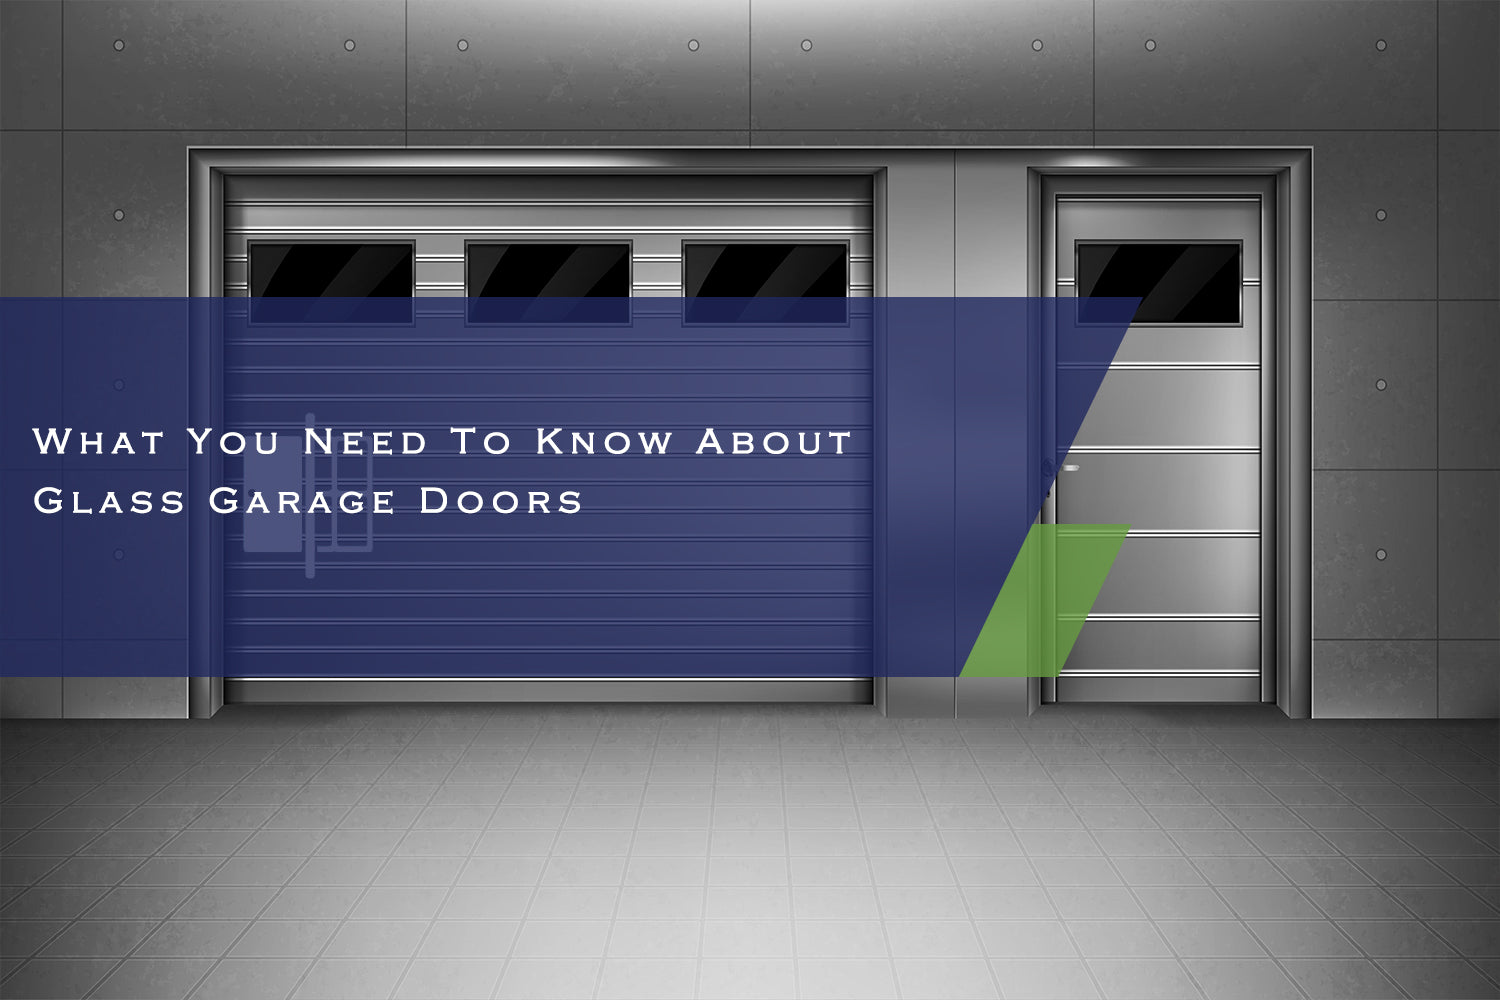 What You Need To Know About Glass Garage Doors